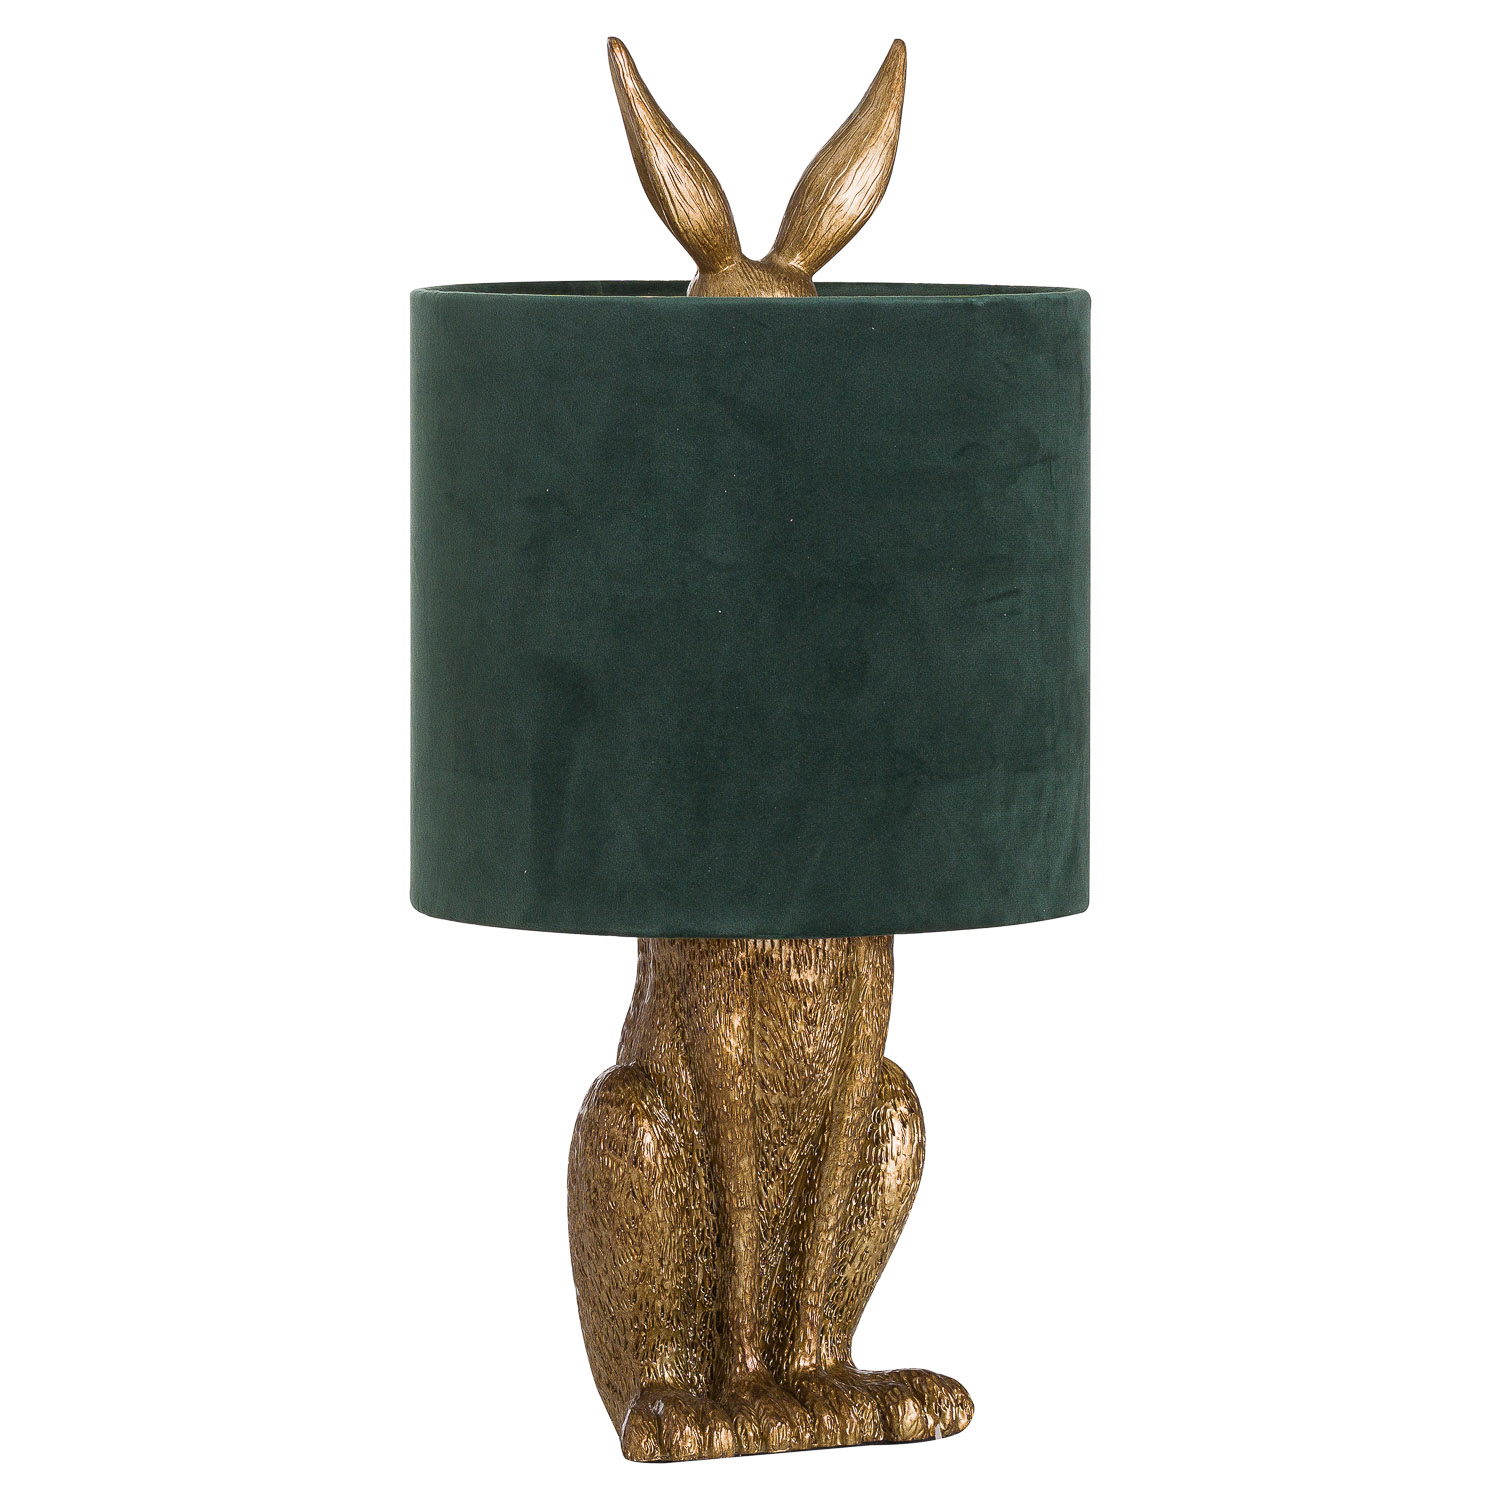 Antique Gold Hare Table Lamp With Green Velvet Shade - Image 1